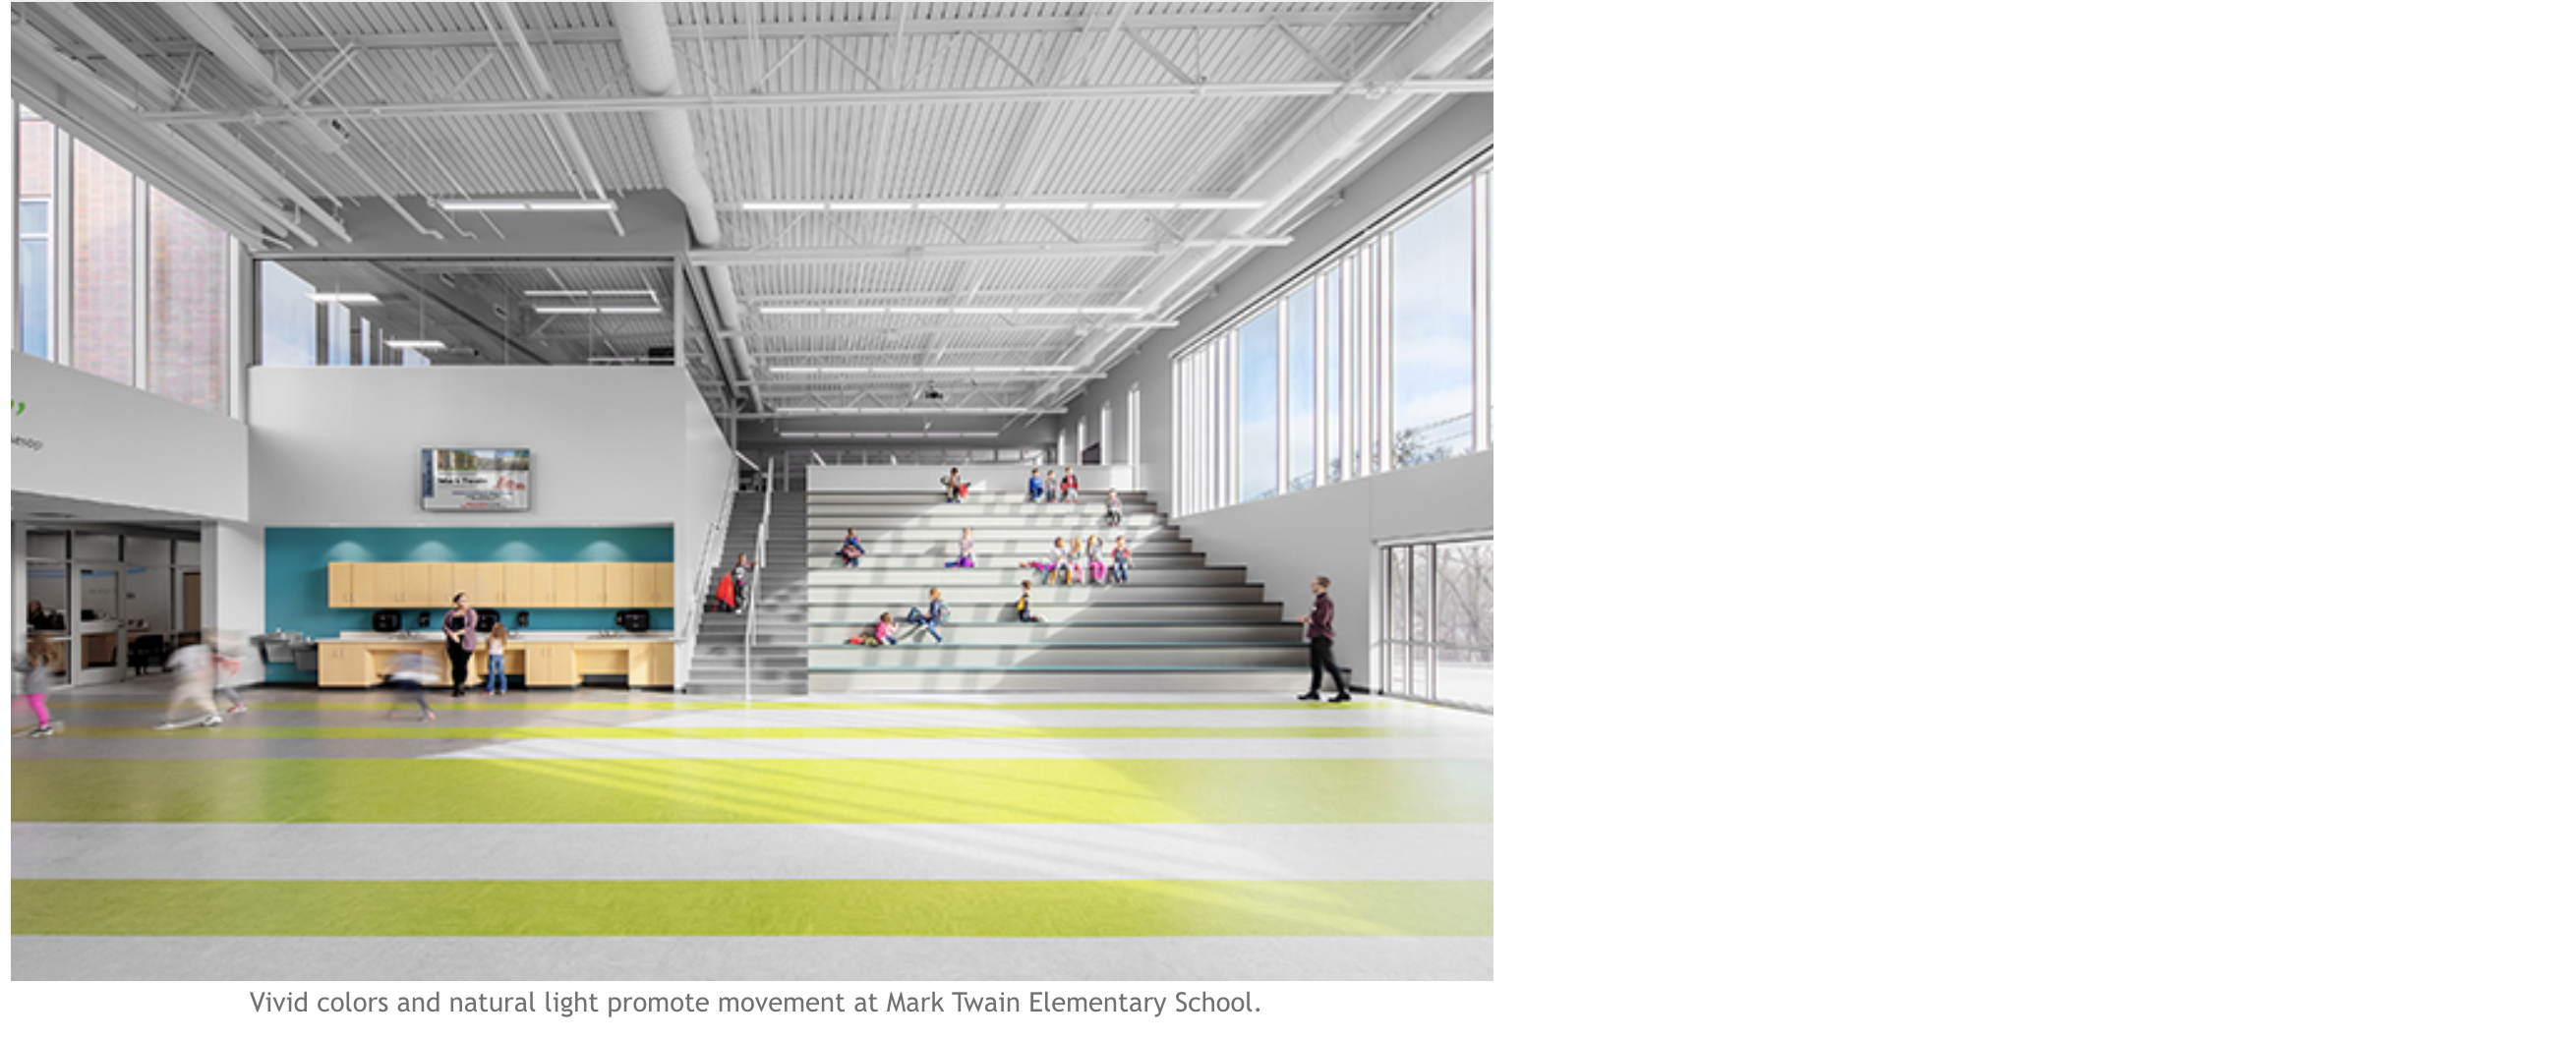 Vivid colors and natural light promote movement at Mark Twain Elementary School.